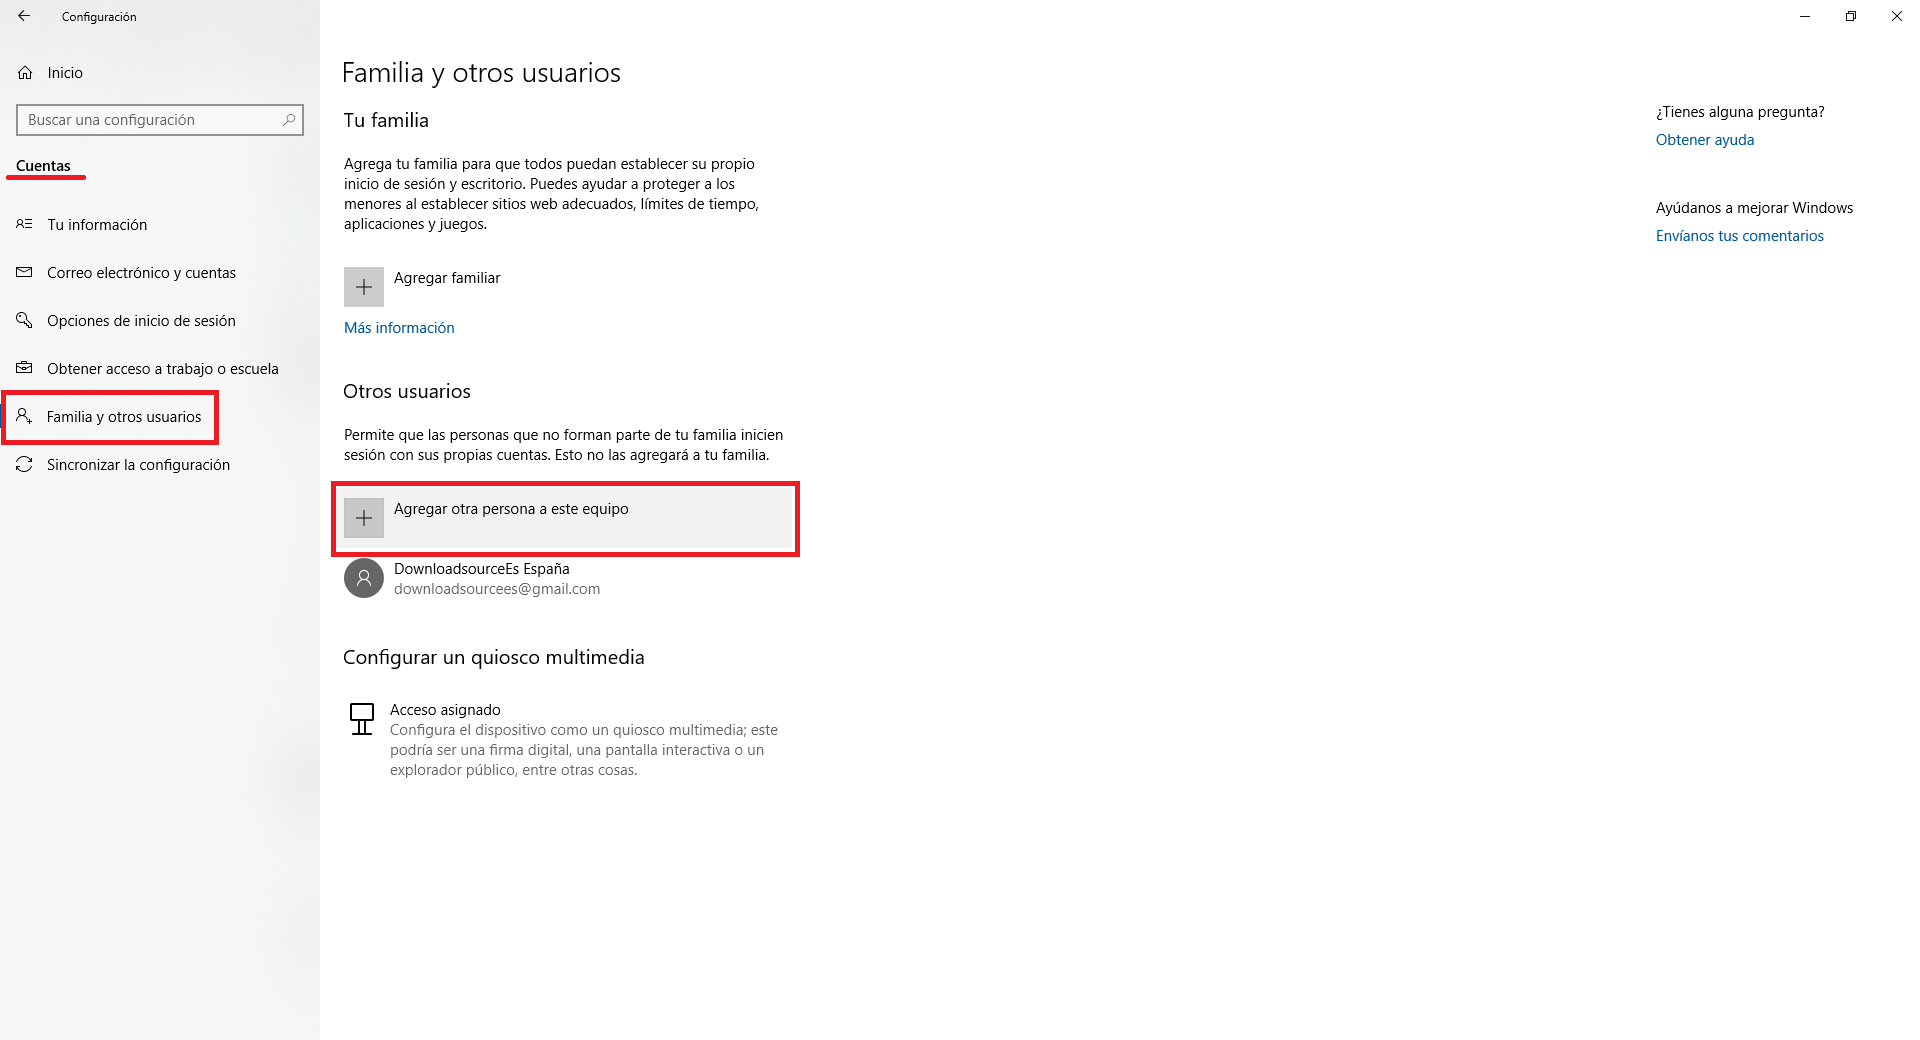 copy and paste in windows 10 does not work correctly